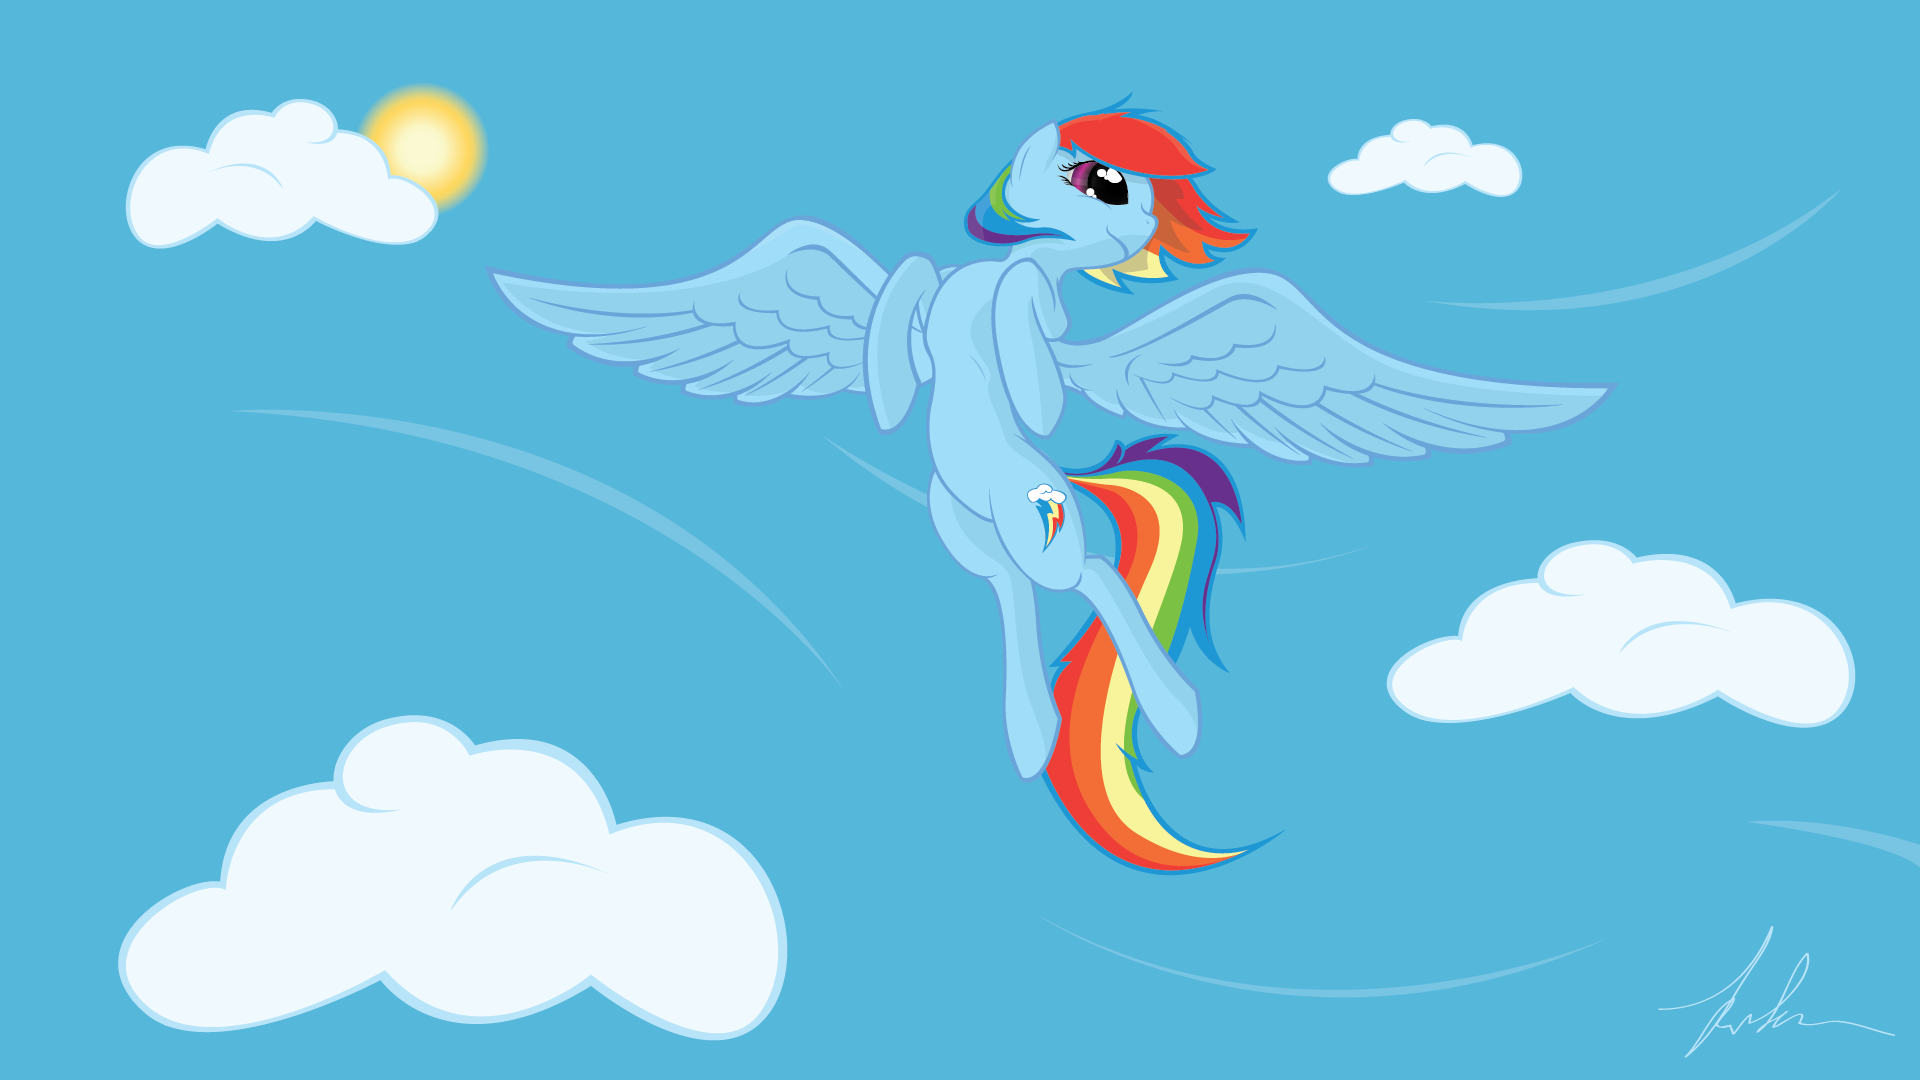 Fly Dashie fly by Wreky